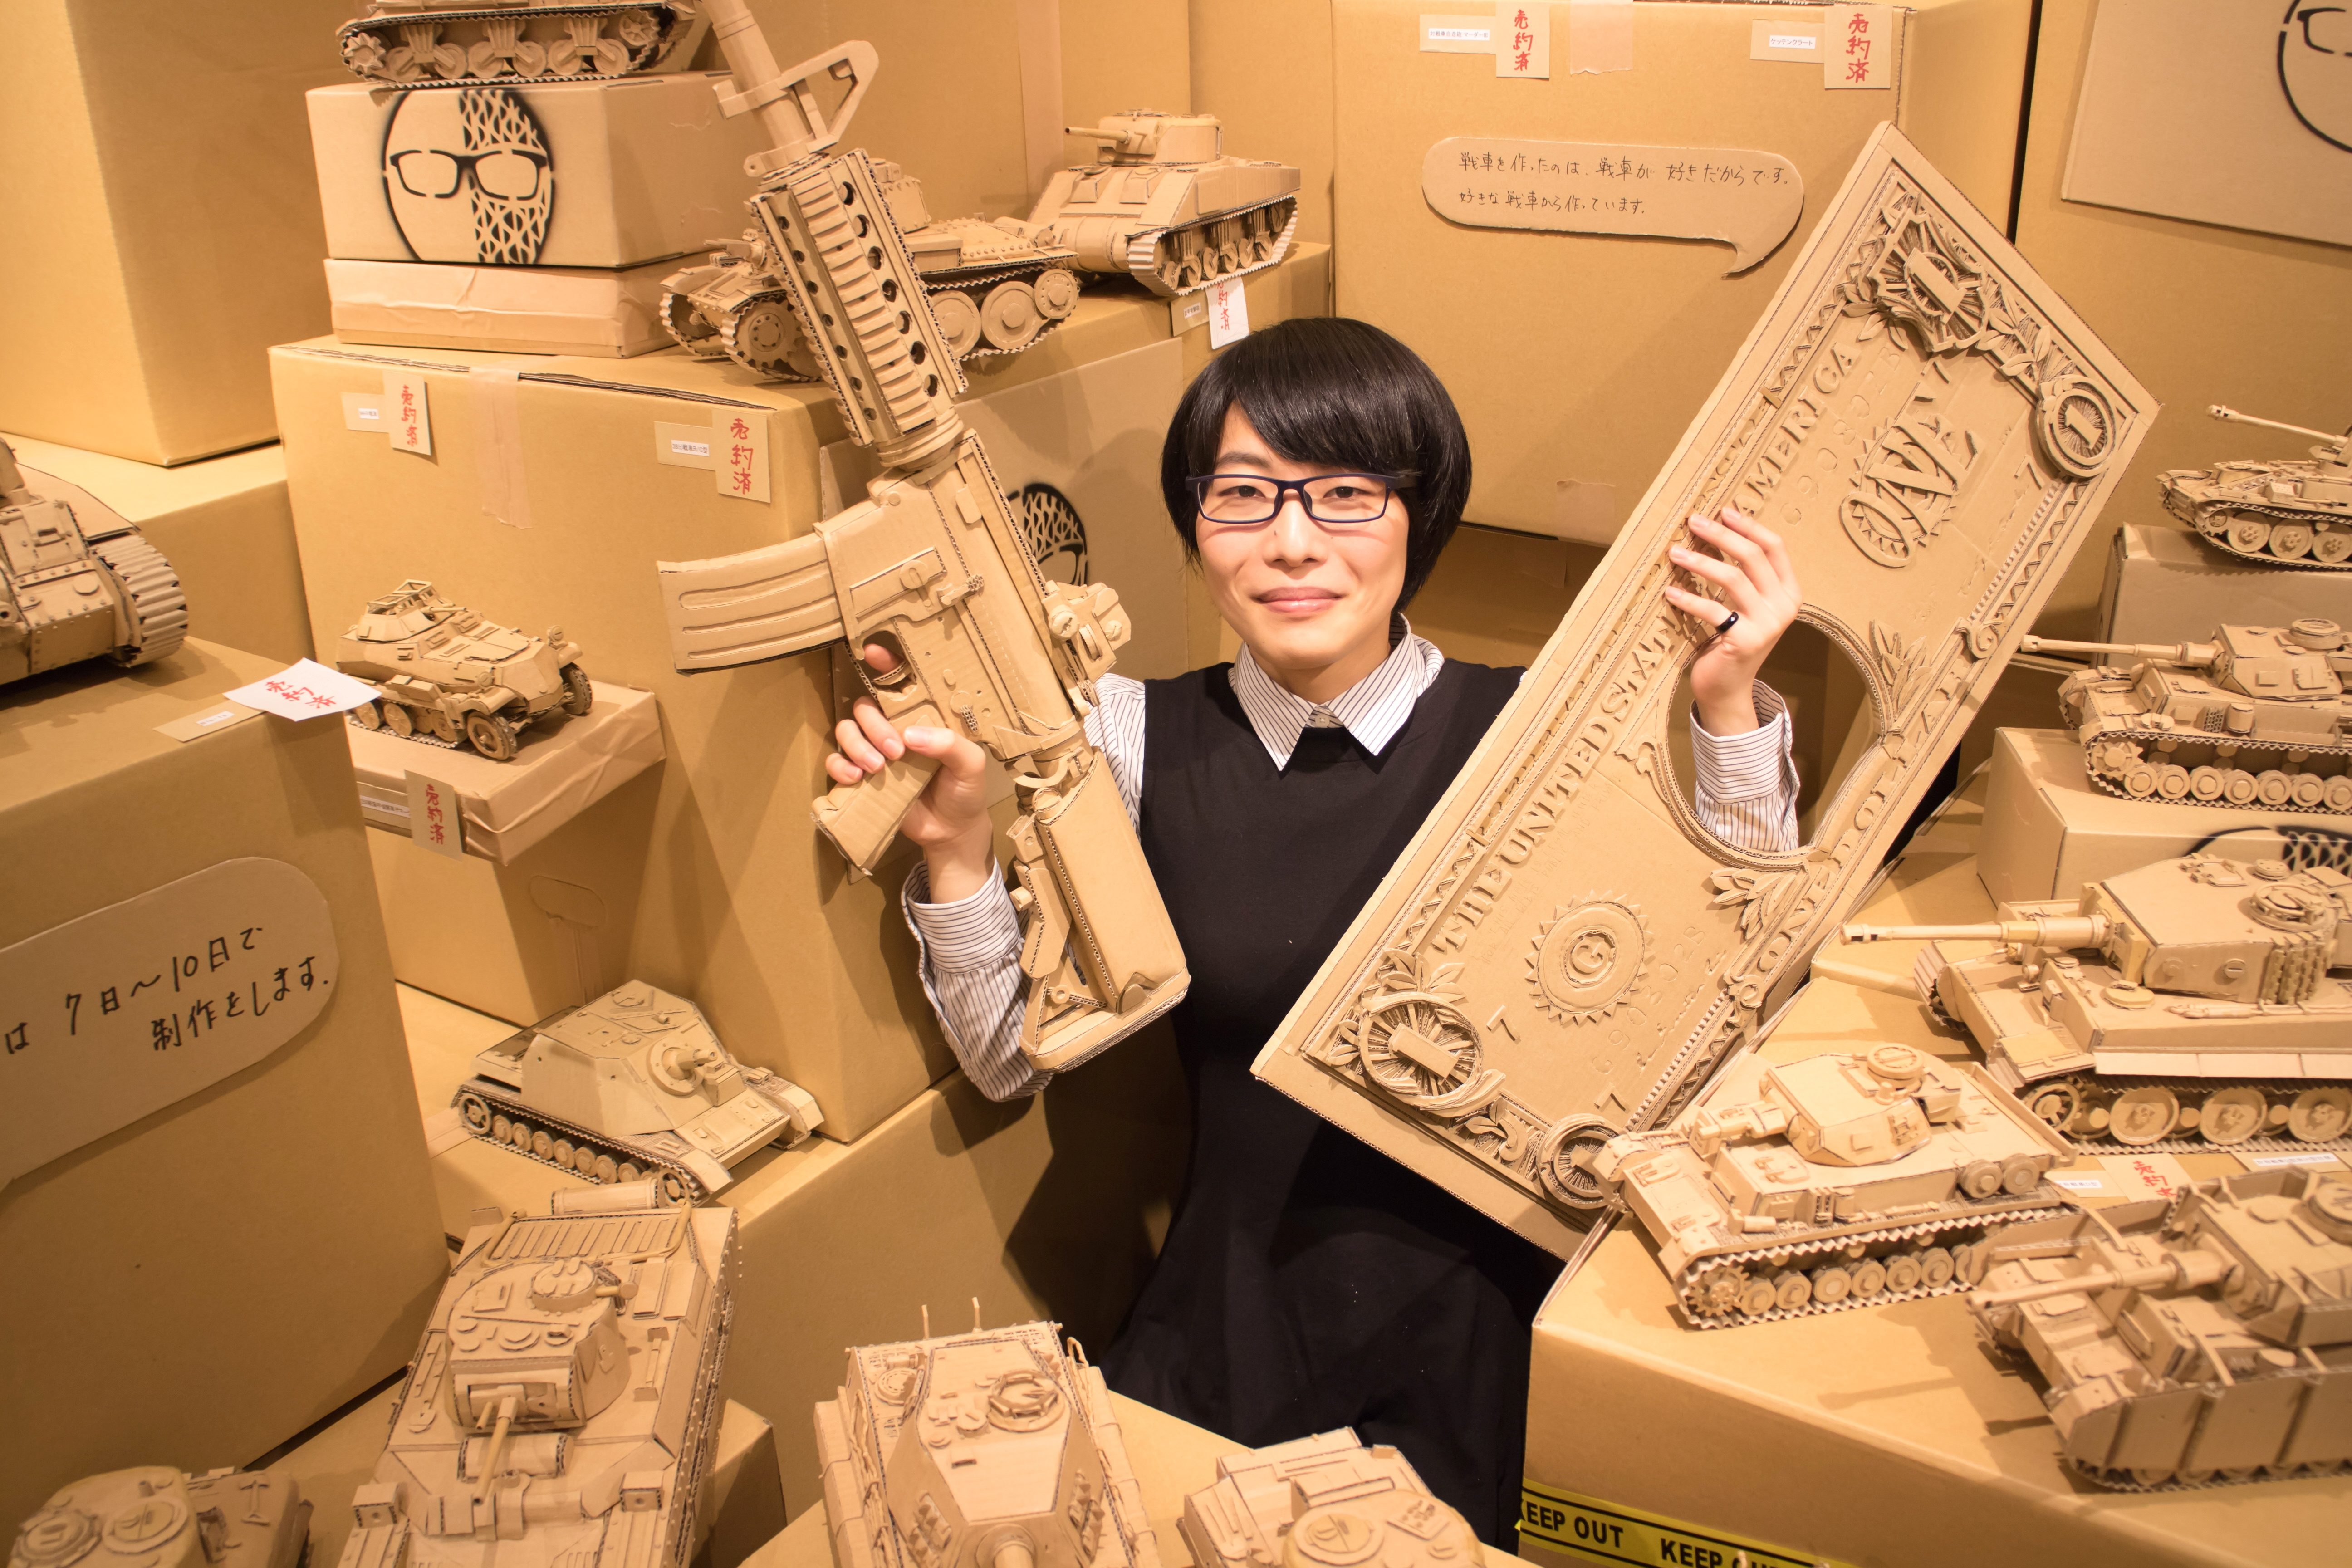 Thinking out of the box: Japanese artist makes life-like cardboard sculptures